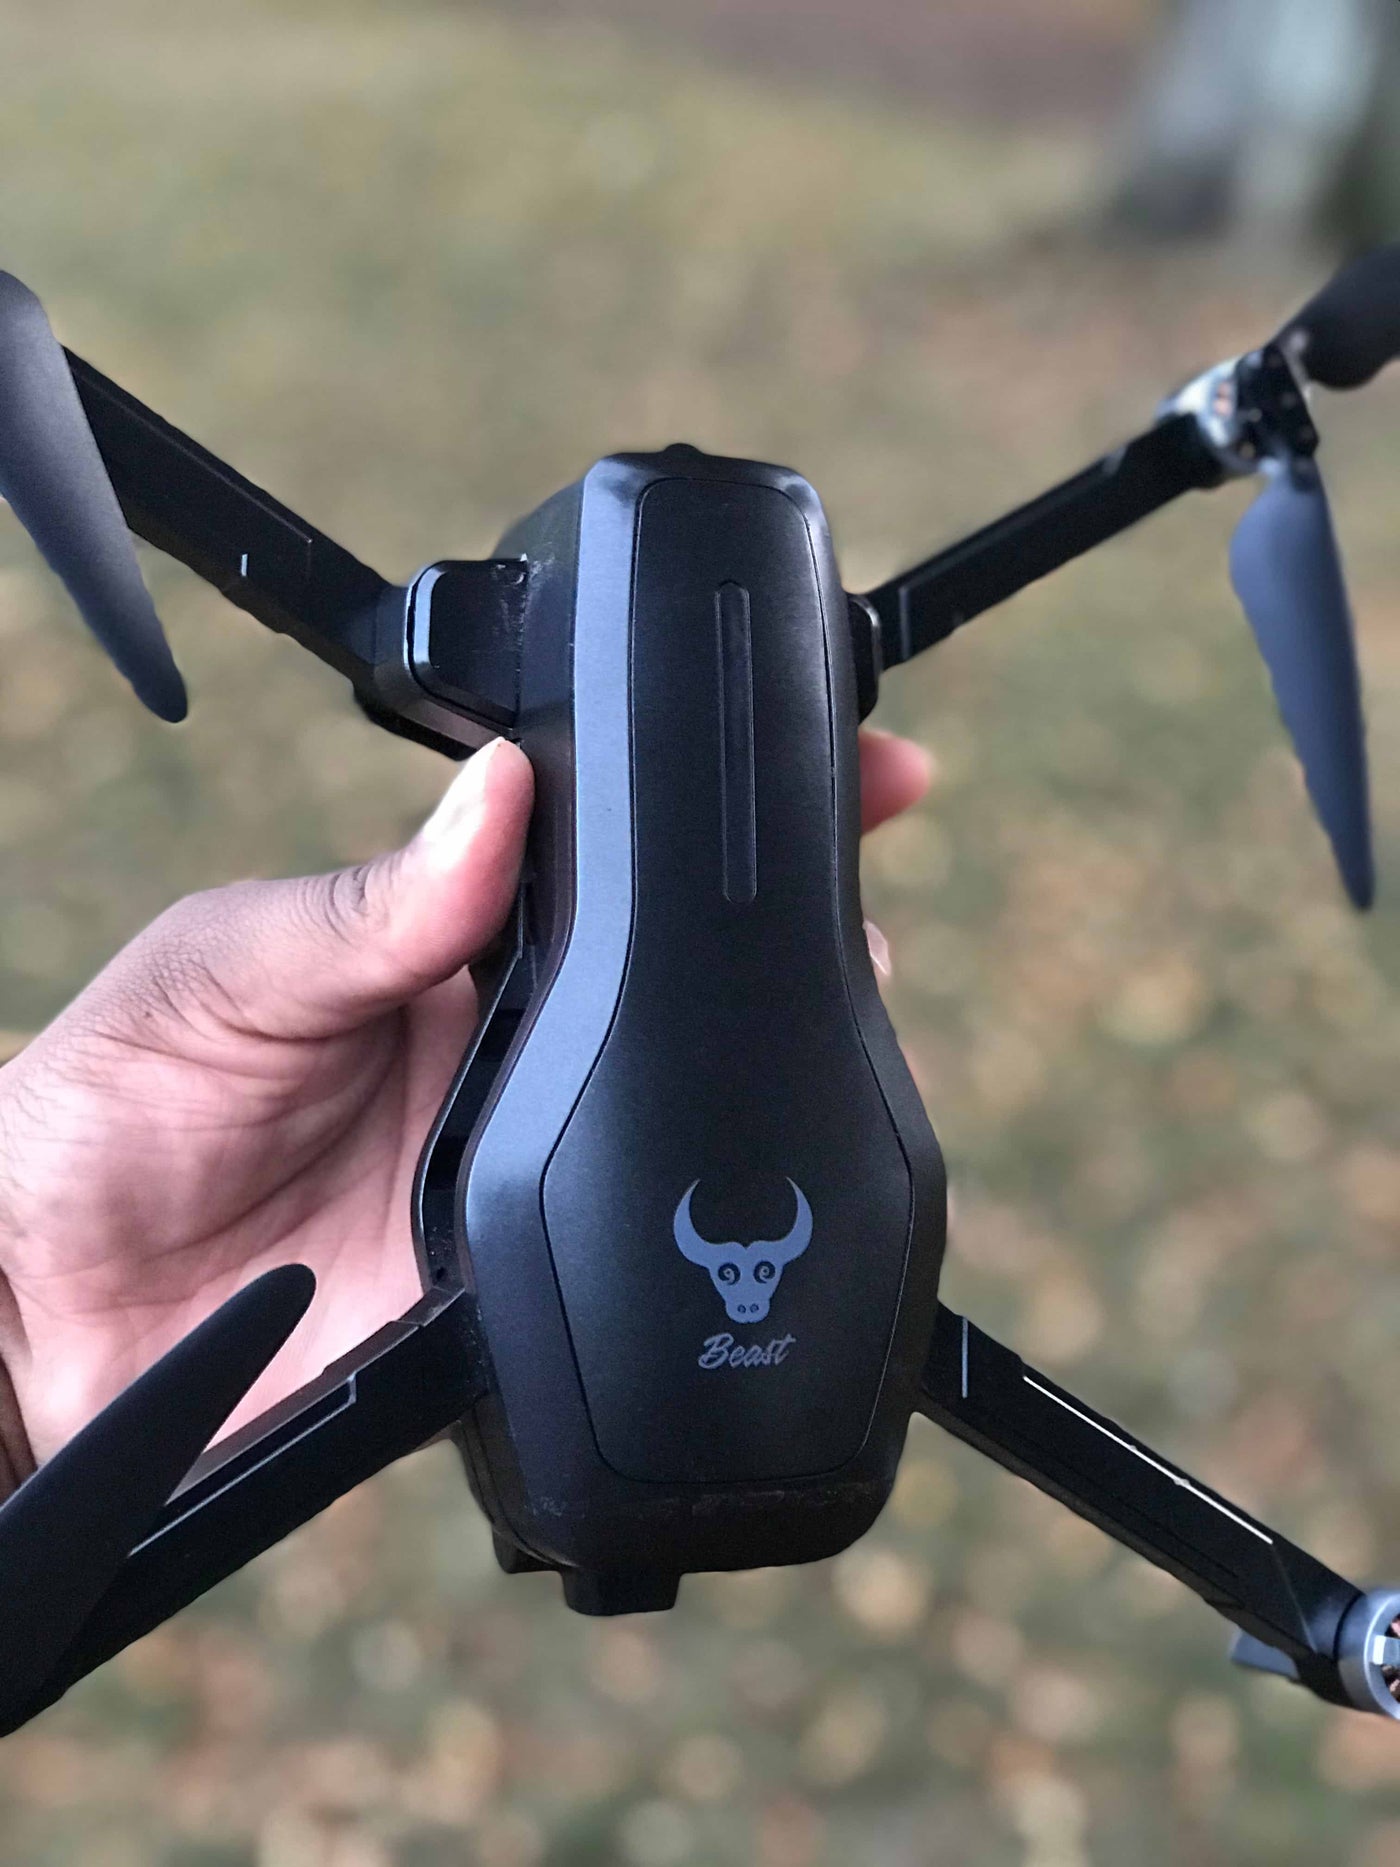 Person Holding SG906 Pro Drone